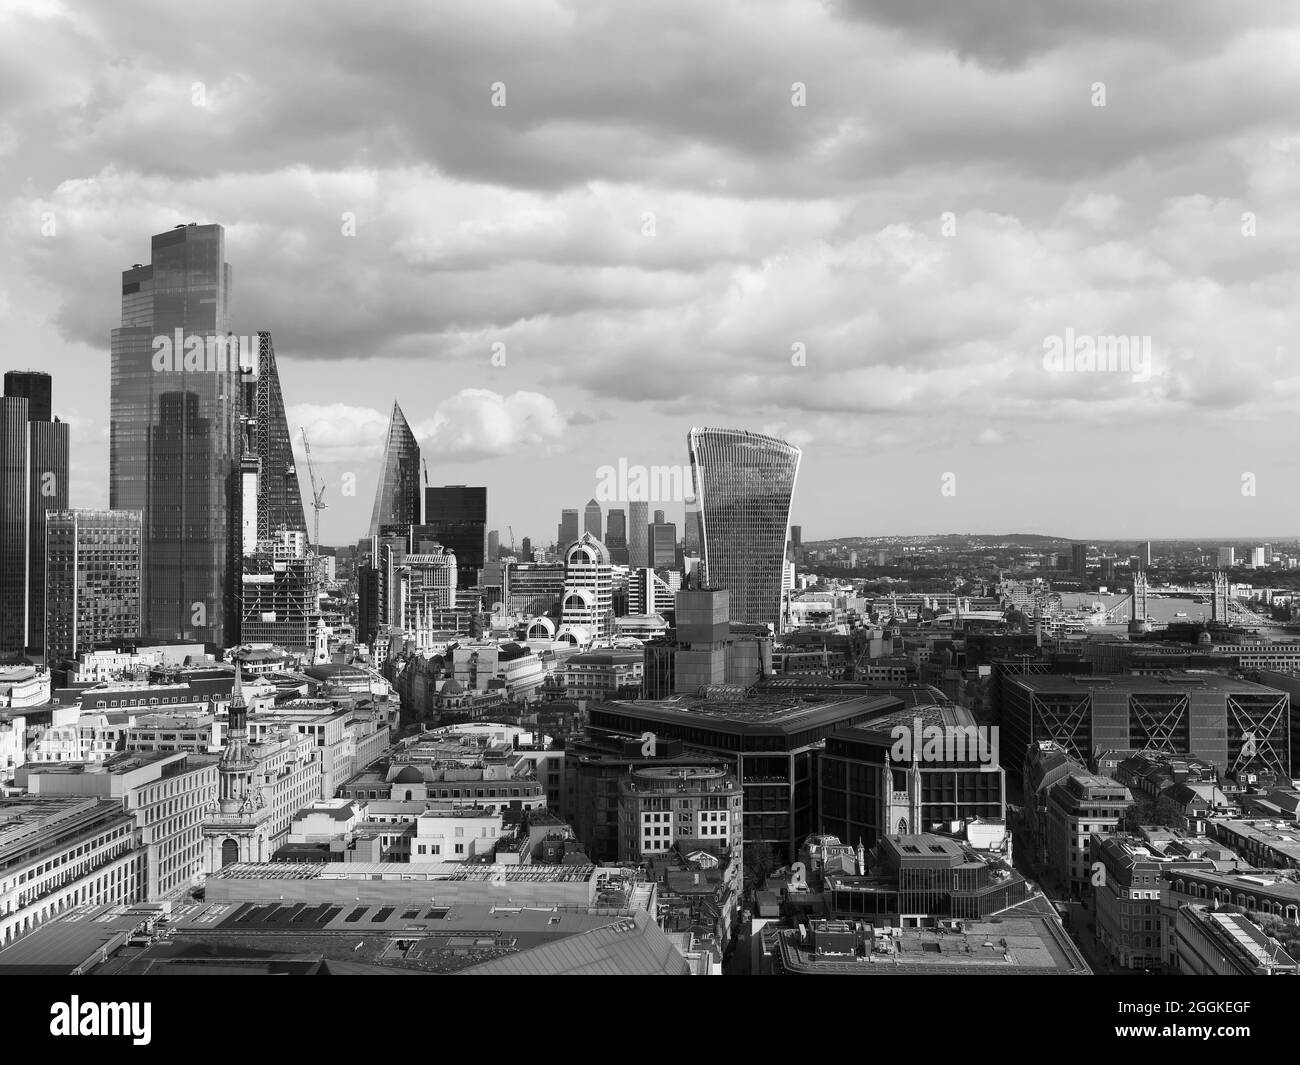 London, Greater London, England, August 24 2021: Elevated view towards London skyscrapers including the Walkie Talkie right of centre and Canary Wharf Stock Photo